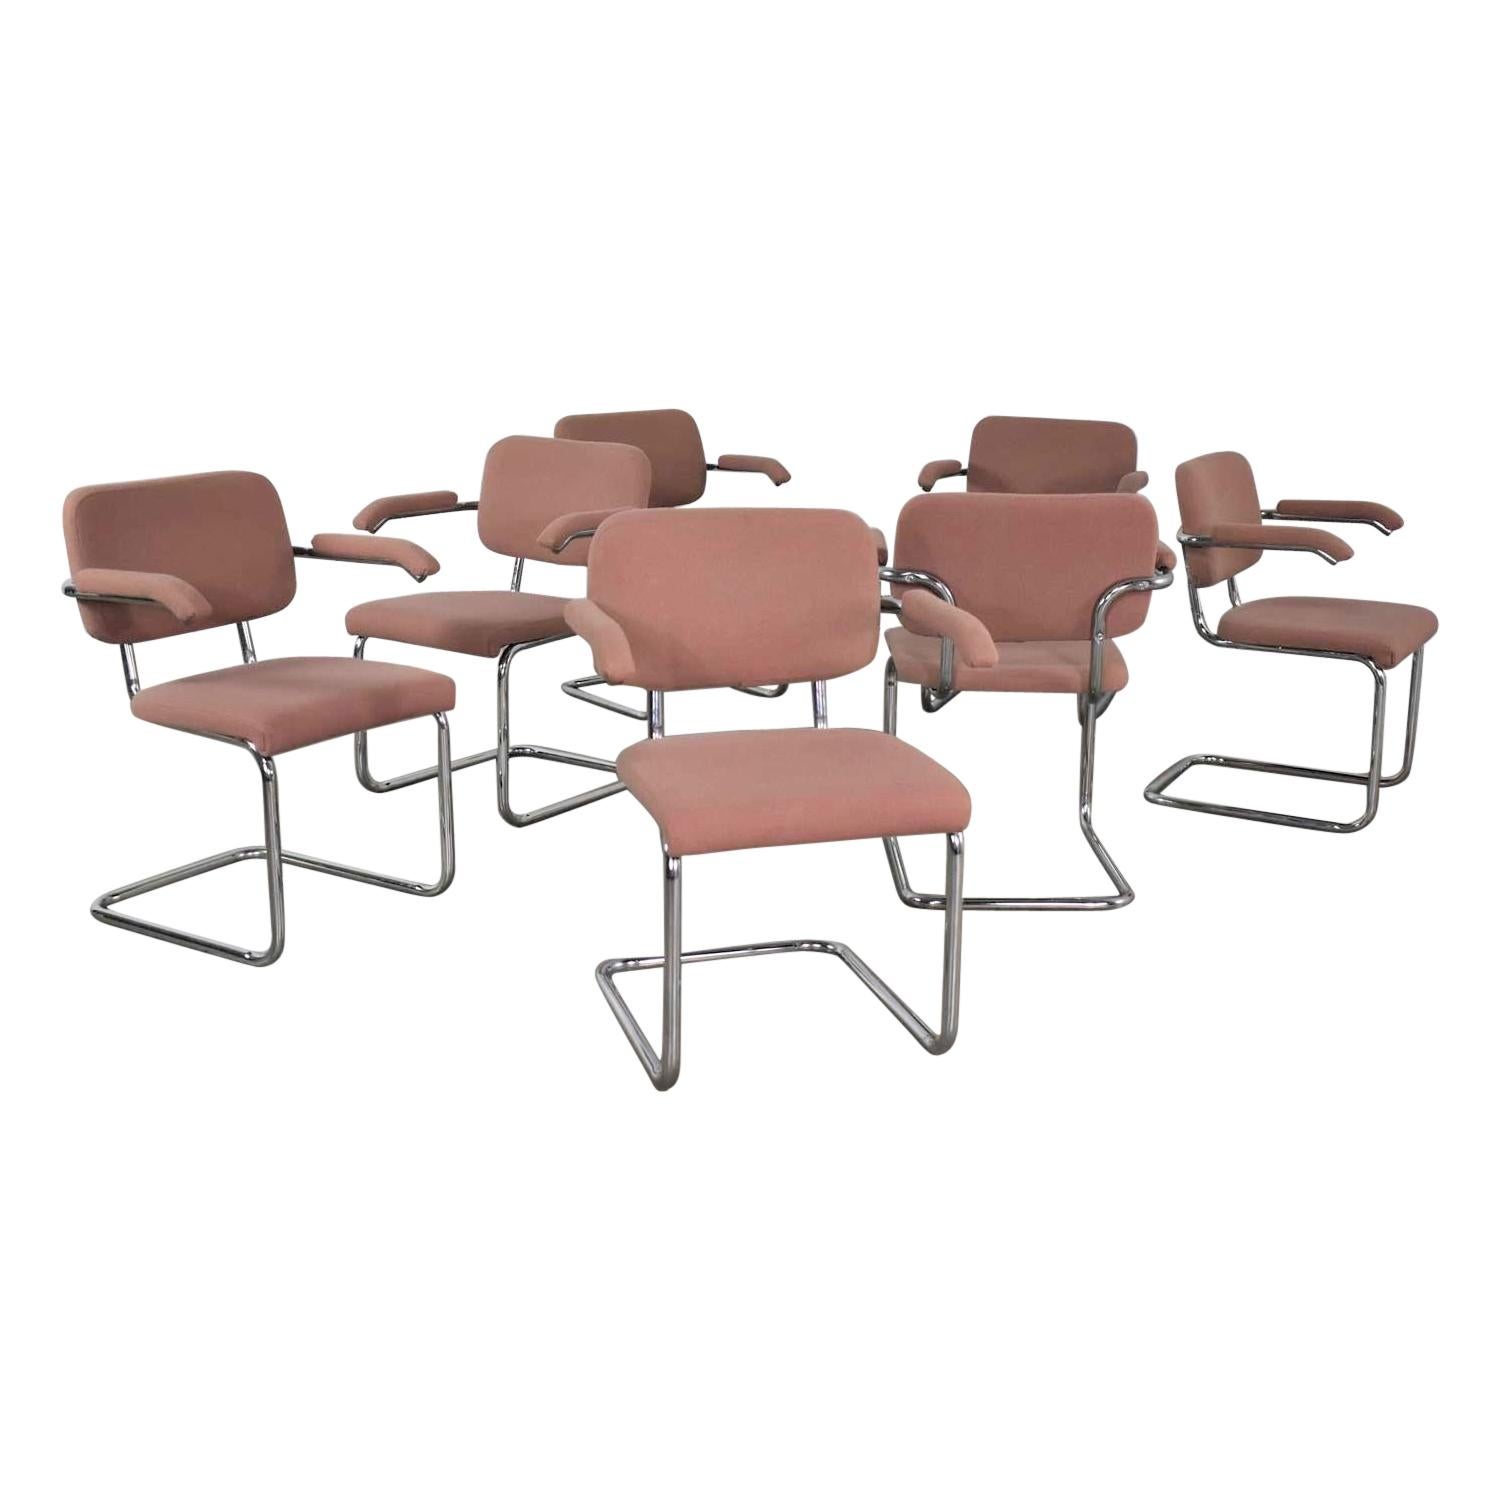 Set of 7 Cantilevered Chrome and Mauve Breuer Cesca Style Dining Chairs by Virco